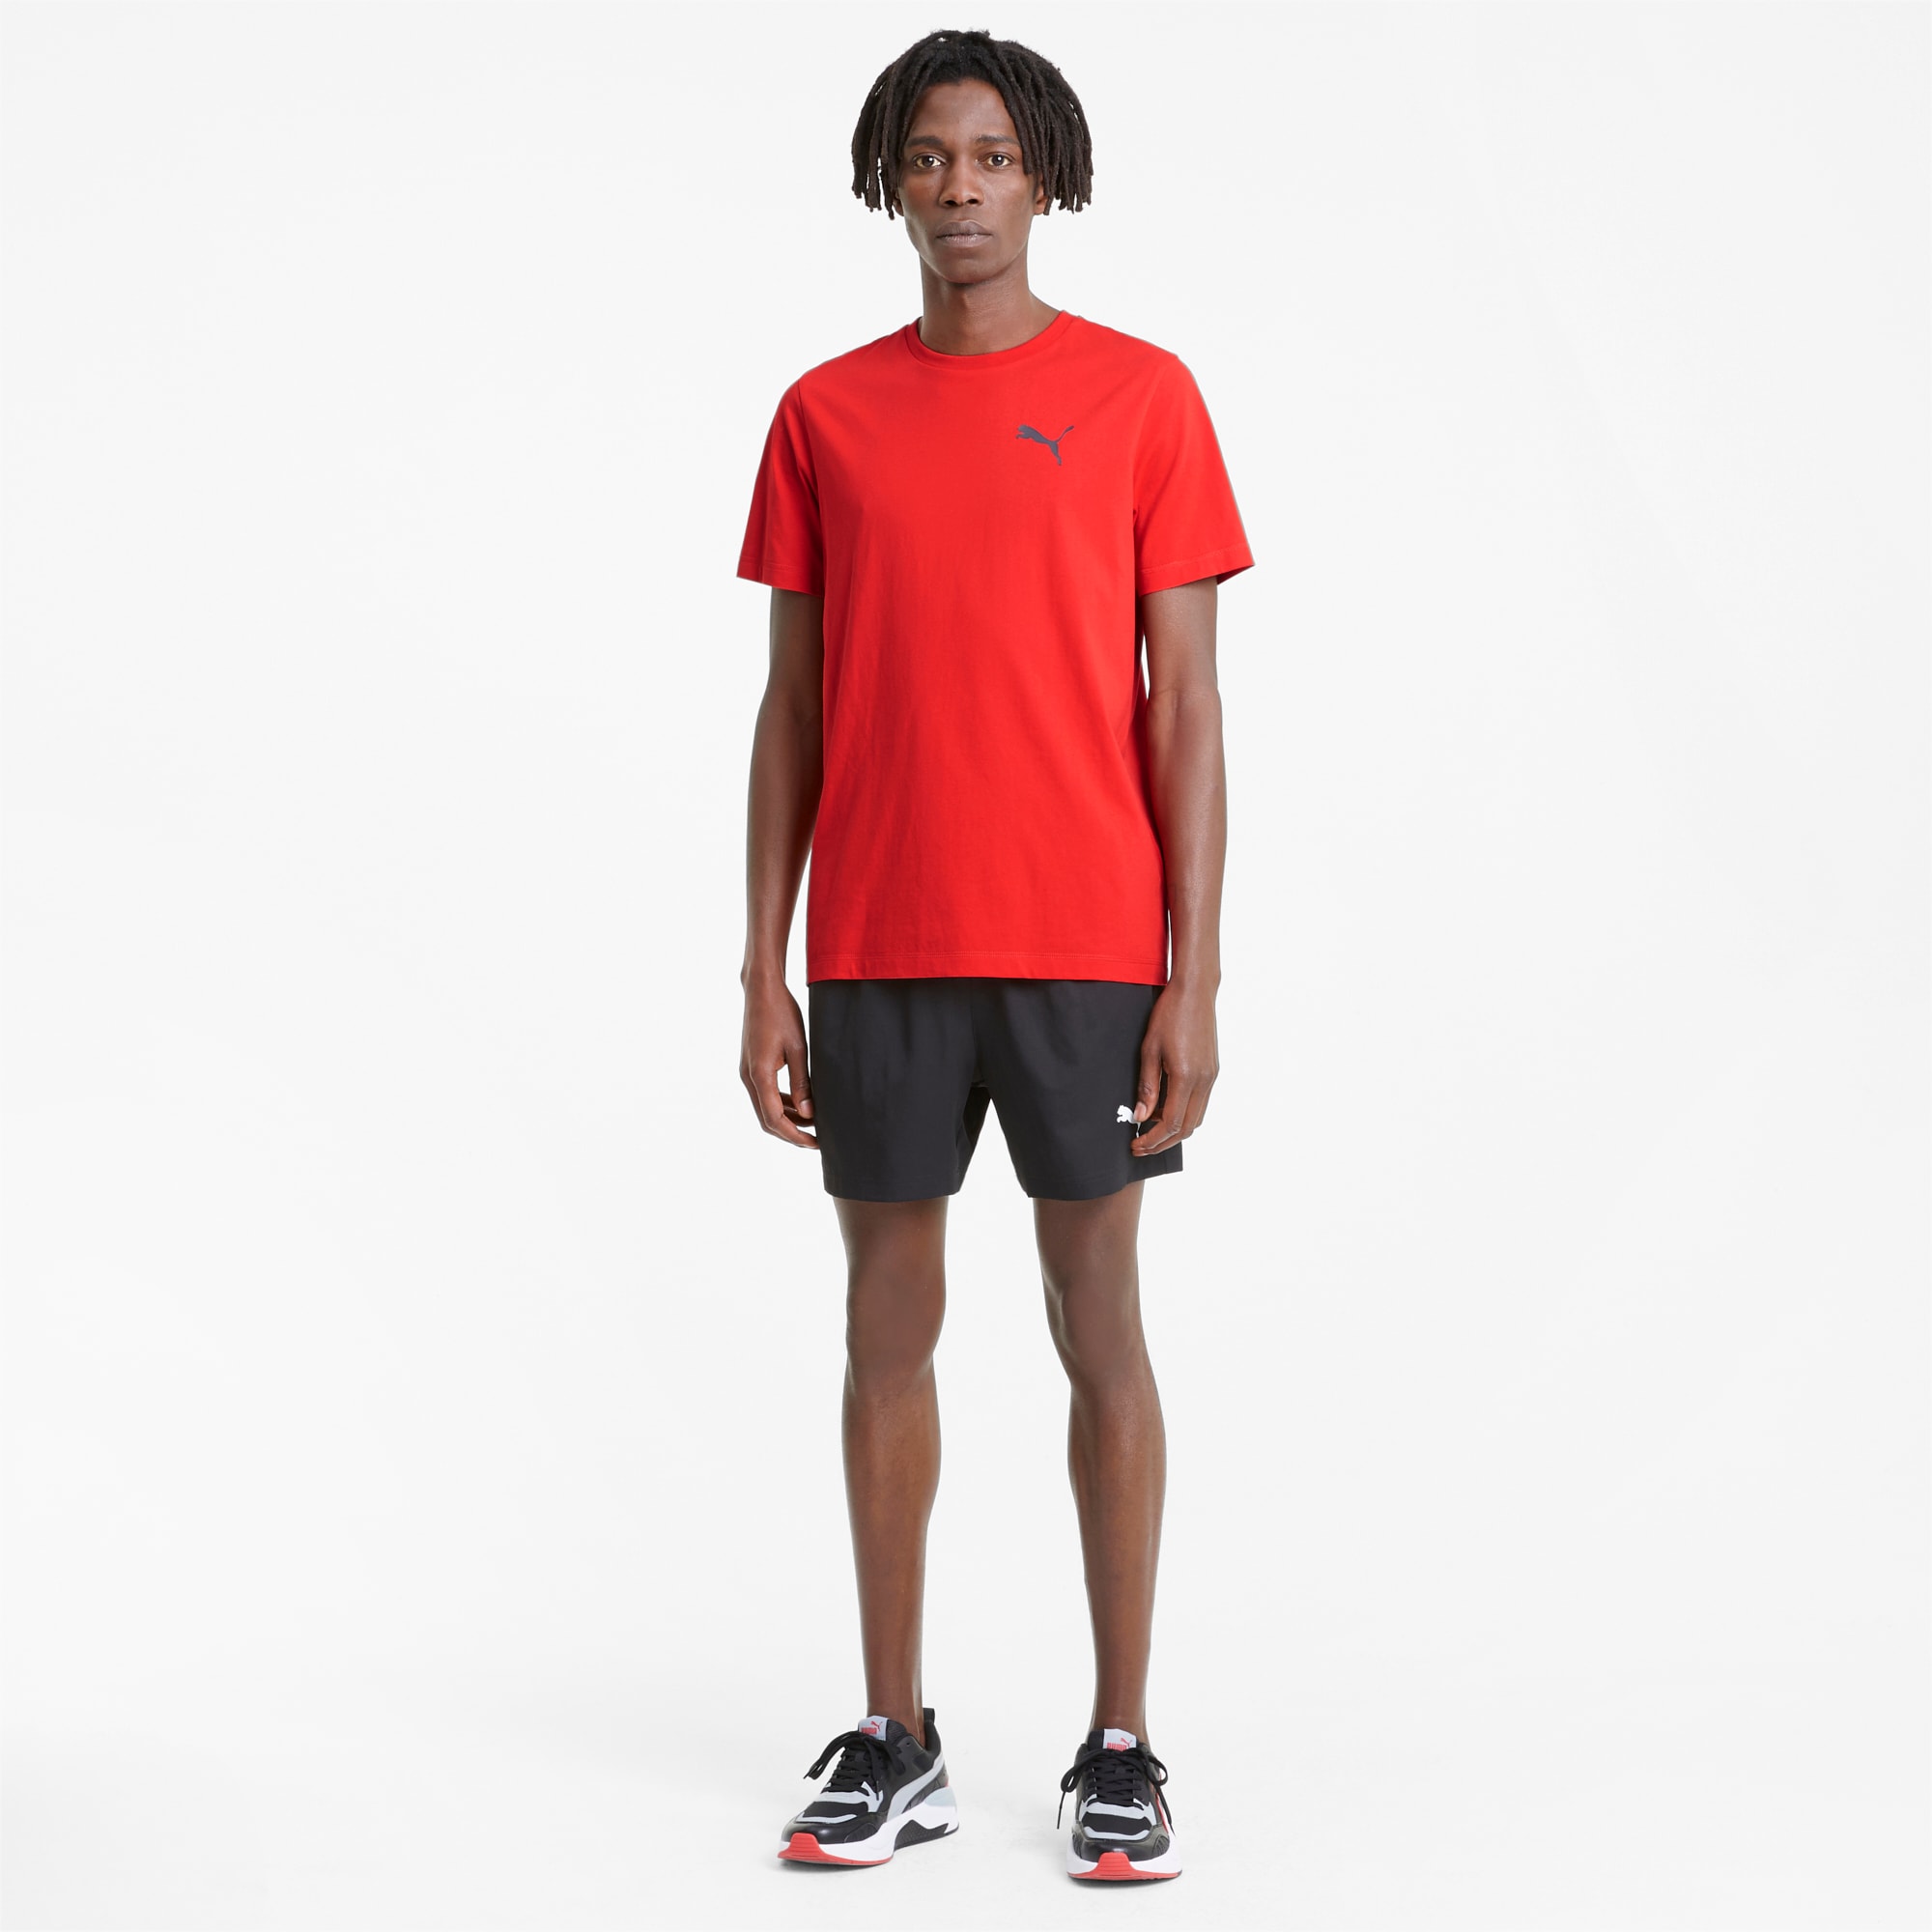 PUMA Active Soft Men's T-Shirt, High Risk Red, Size XXL, Clothing